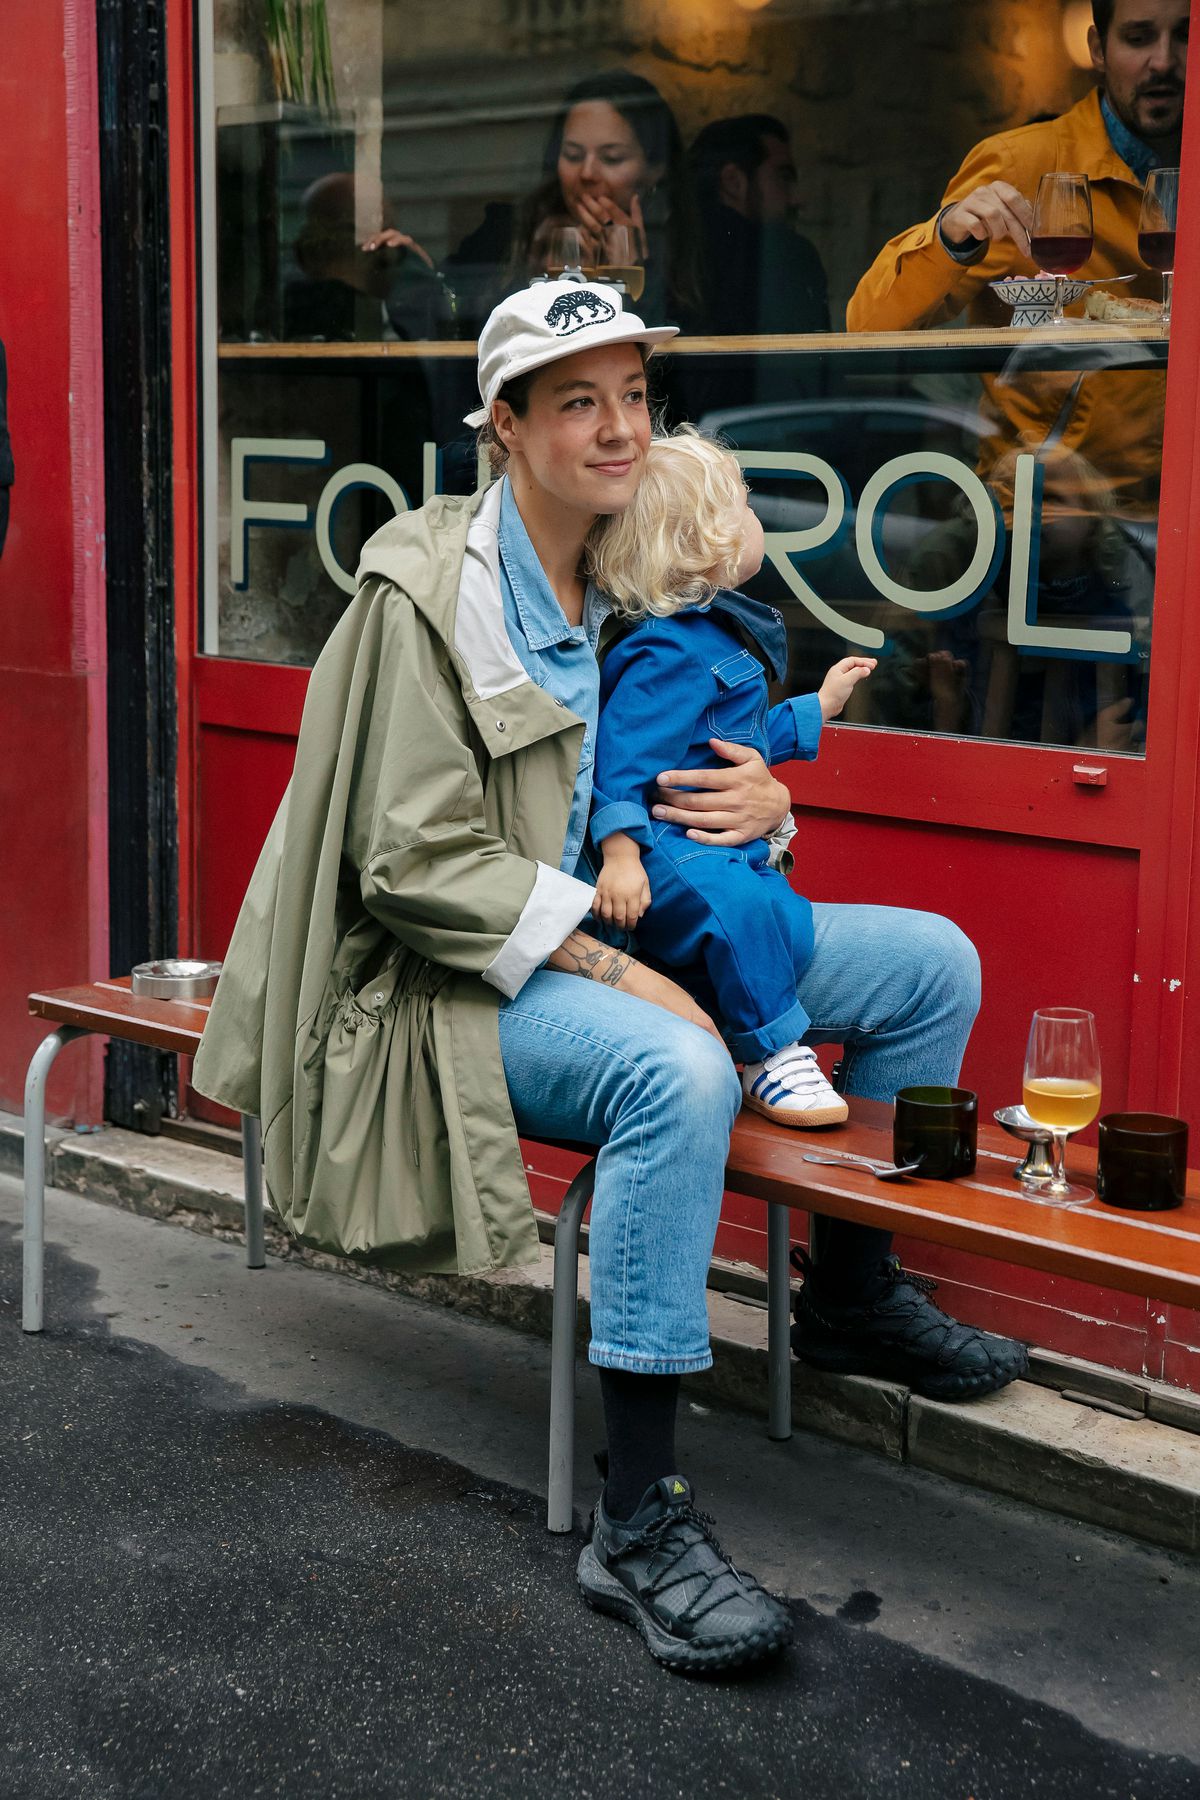 A woman cuddles her child on a bench in front of a wine bar.